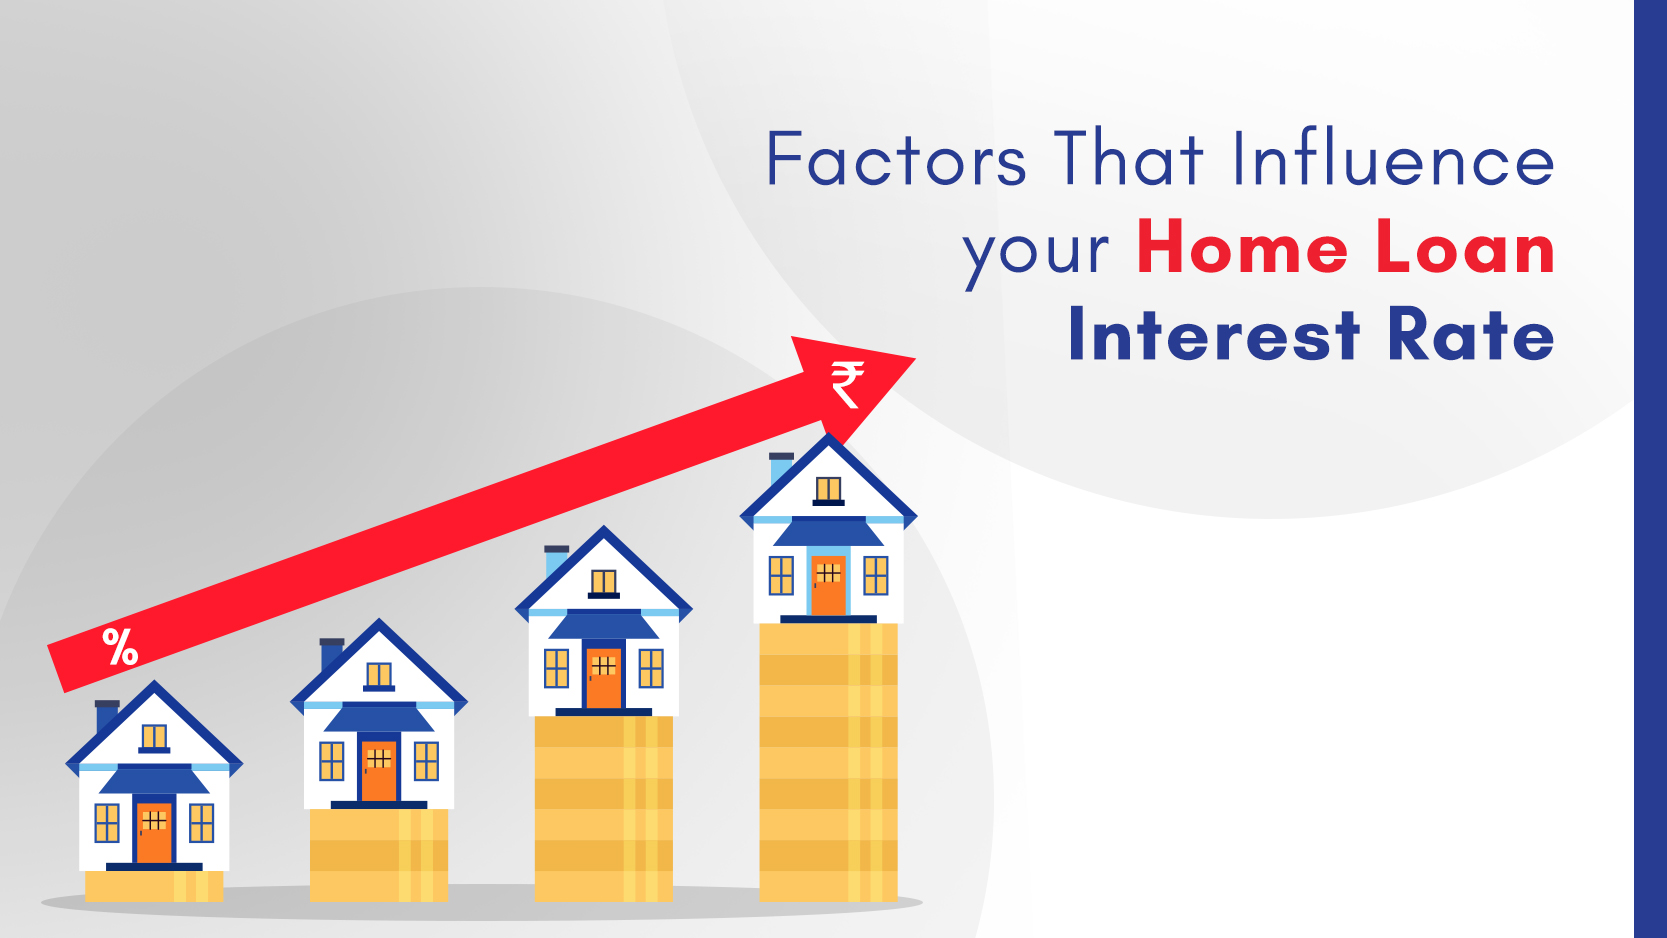 Factors That Influence your Home Loan Interest Rate